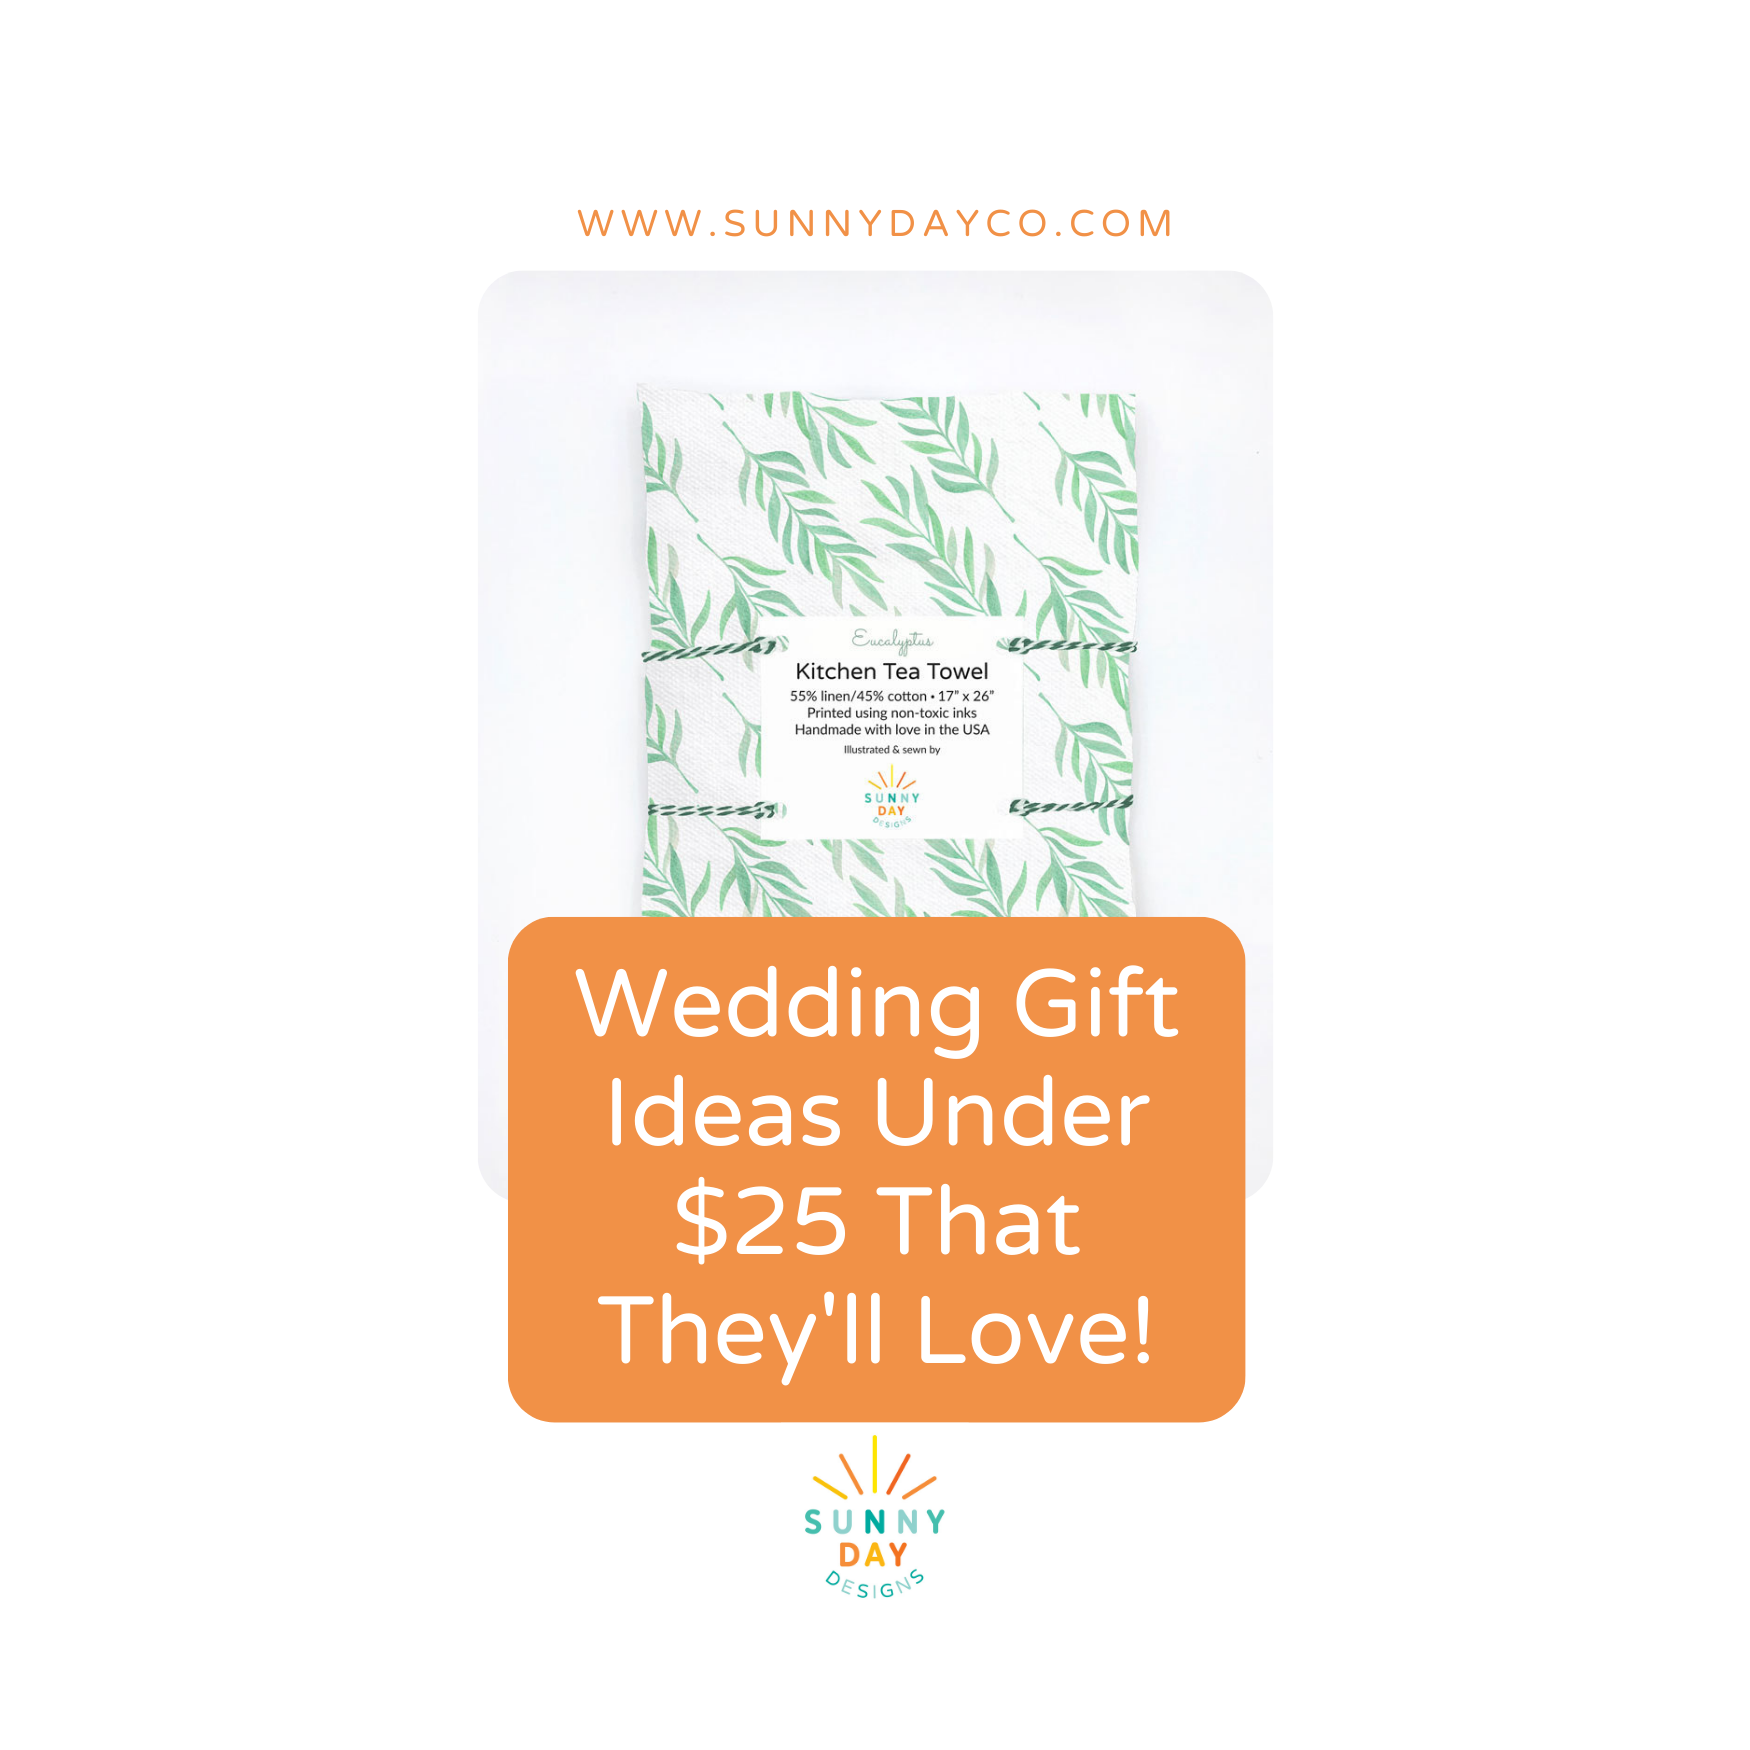 11 Wedding Gift Ideas For Friends Perfect For Your BFF's Big Day